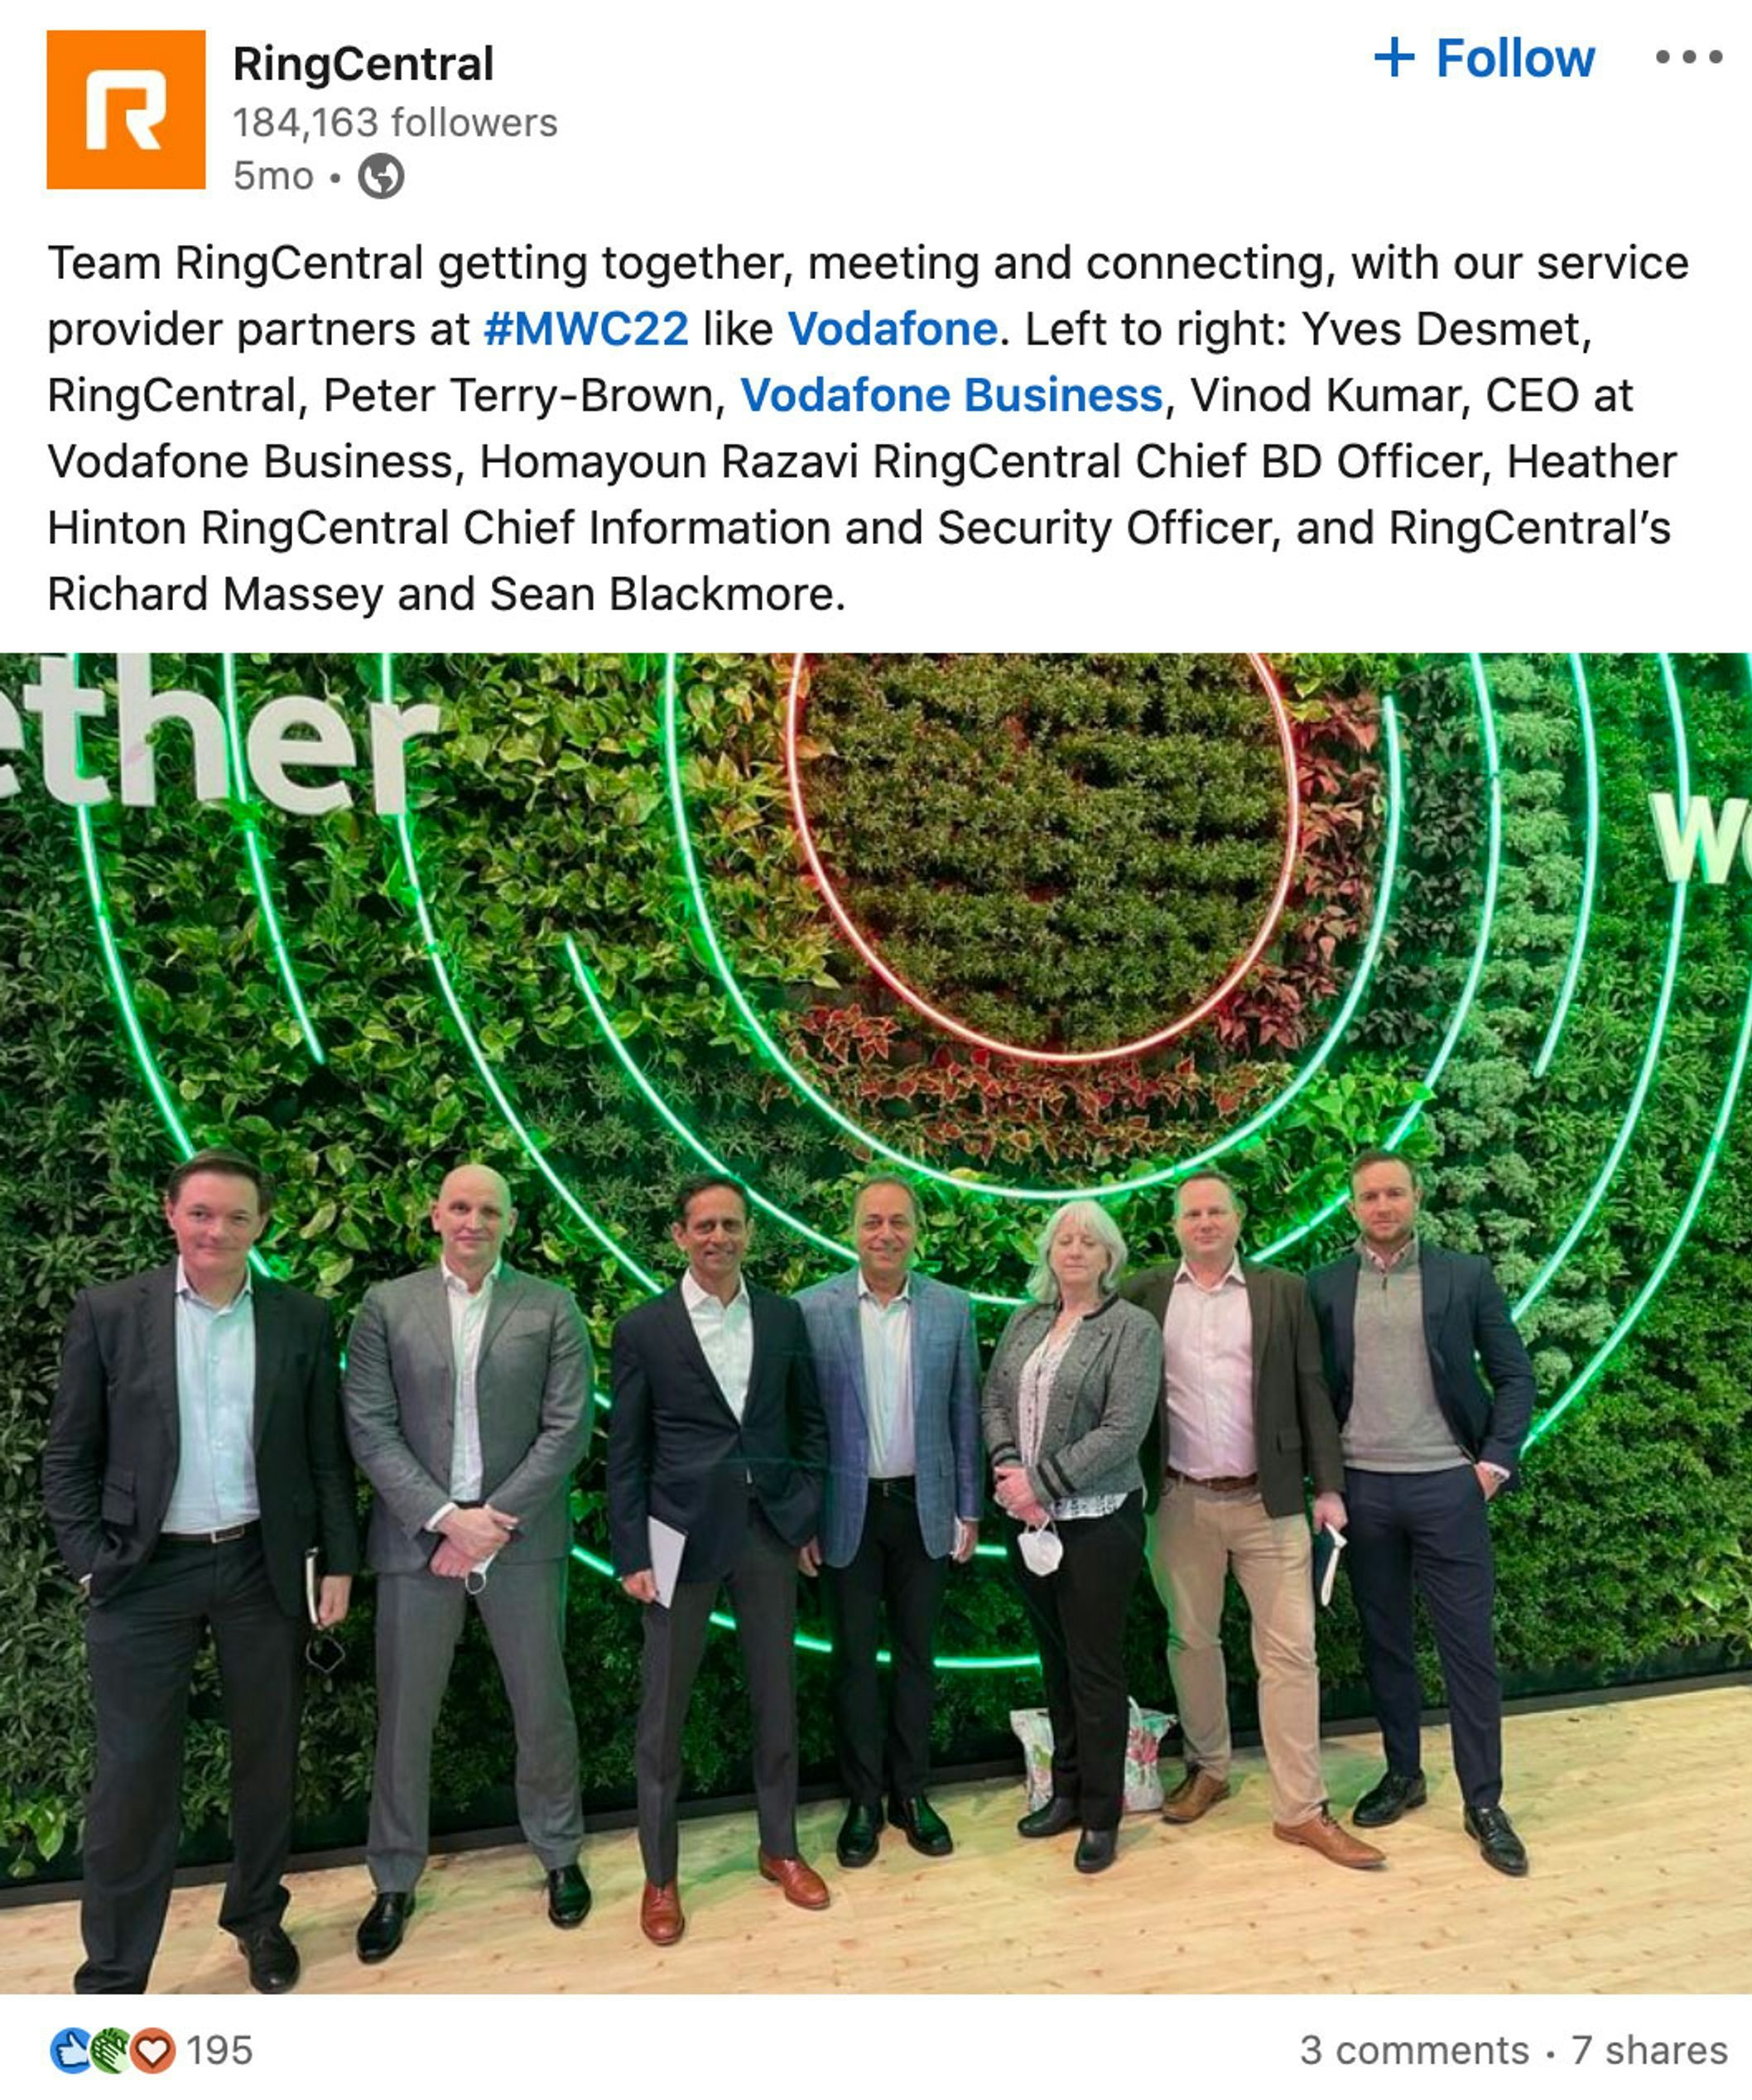 Professionals from RingCentral and Vodafone Business pose together in front of a green, circular logo at #MWC22.